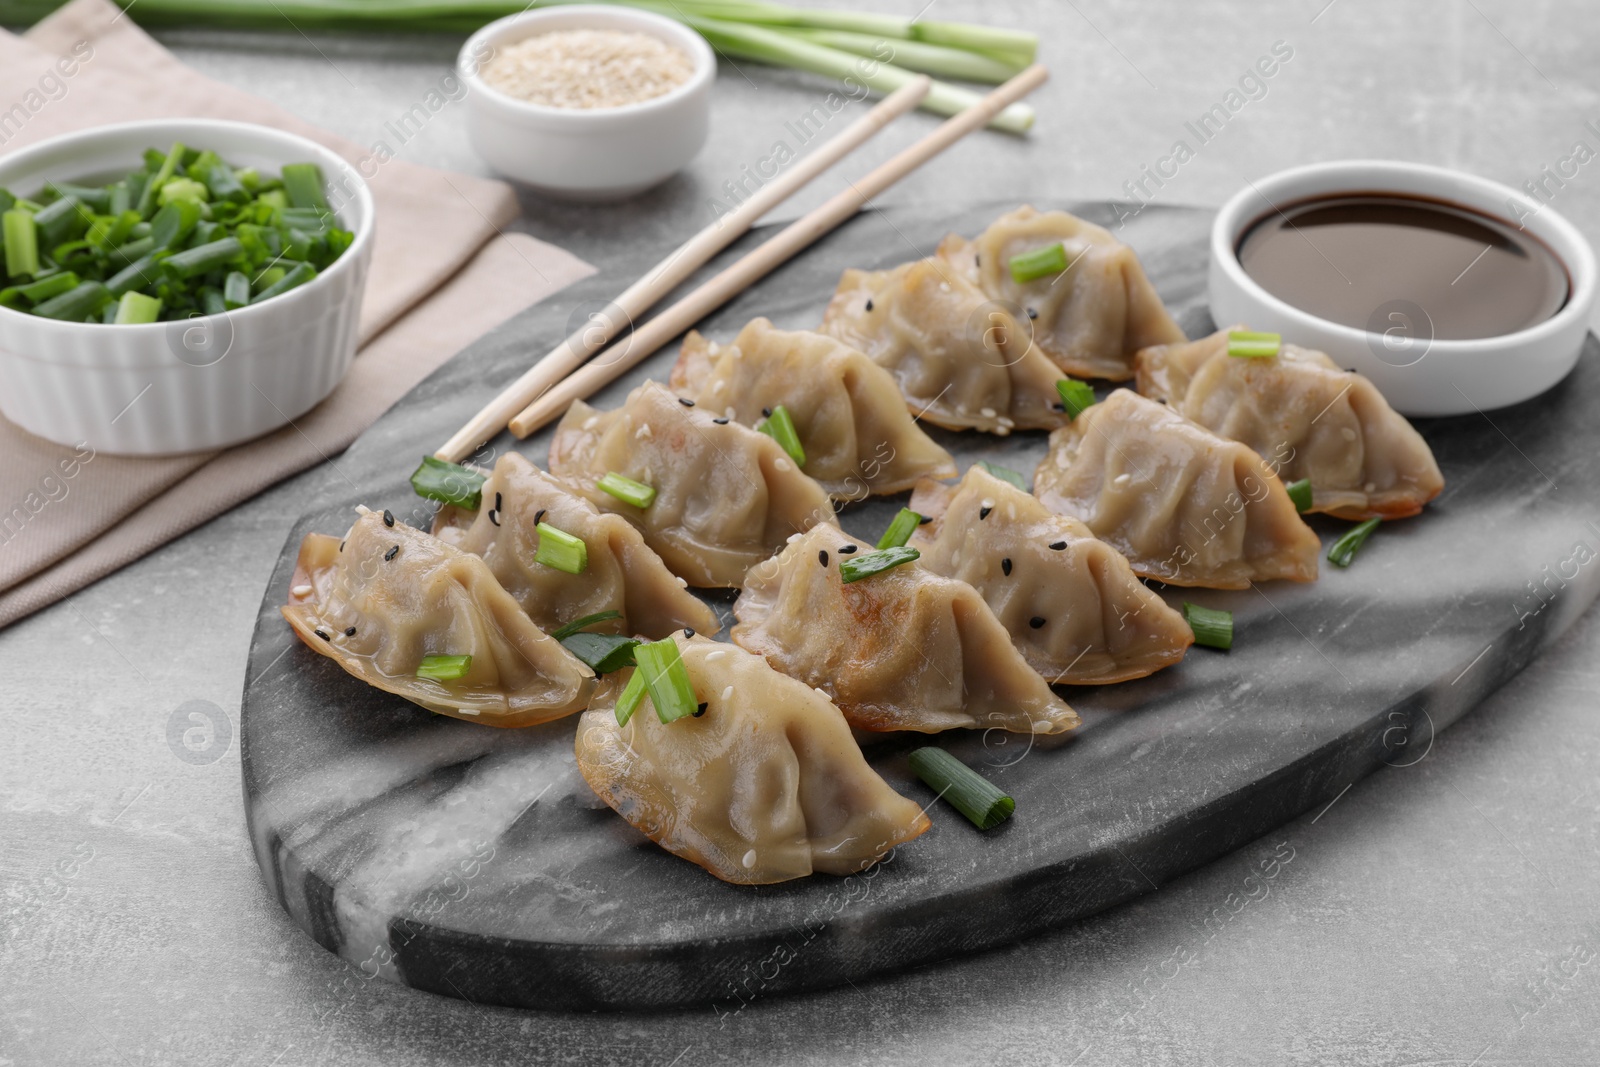 Photo of Delicious gyoza (asian dumplings) with green onions, soy sauce and chopsticks on light gray table